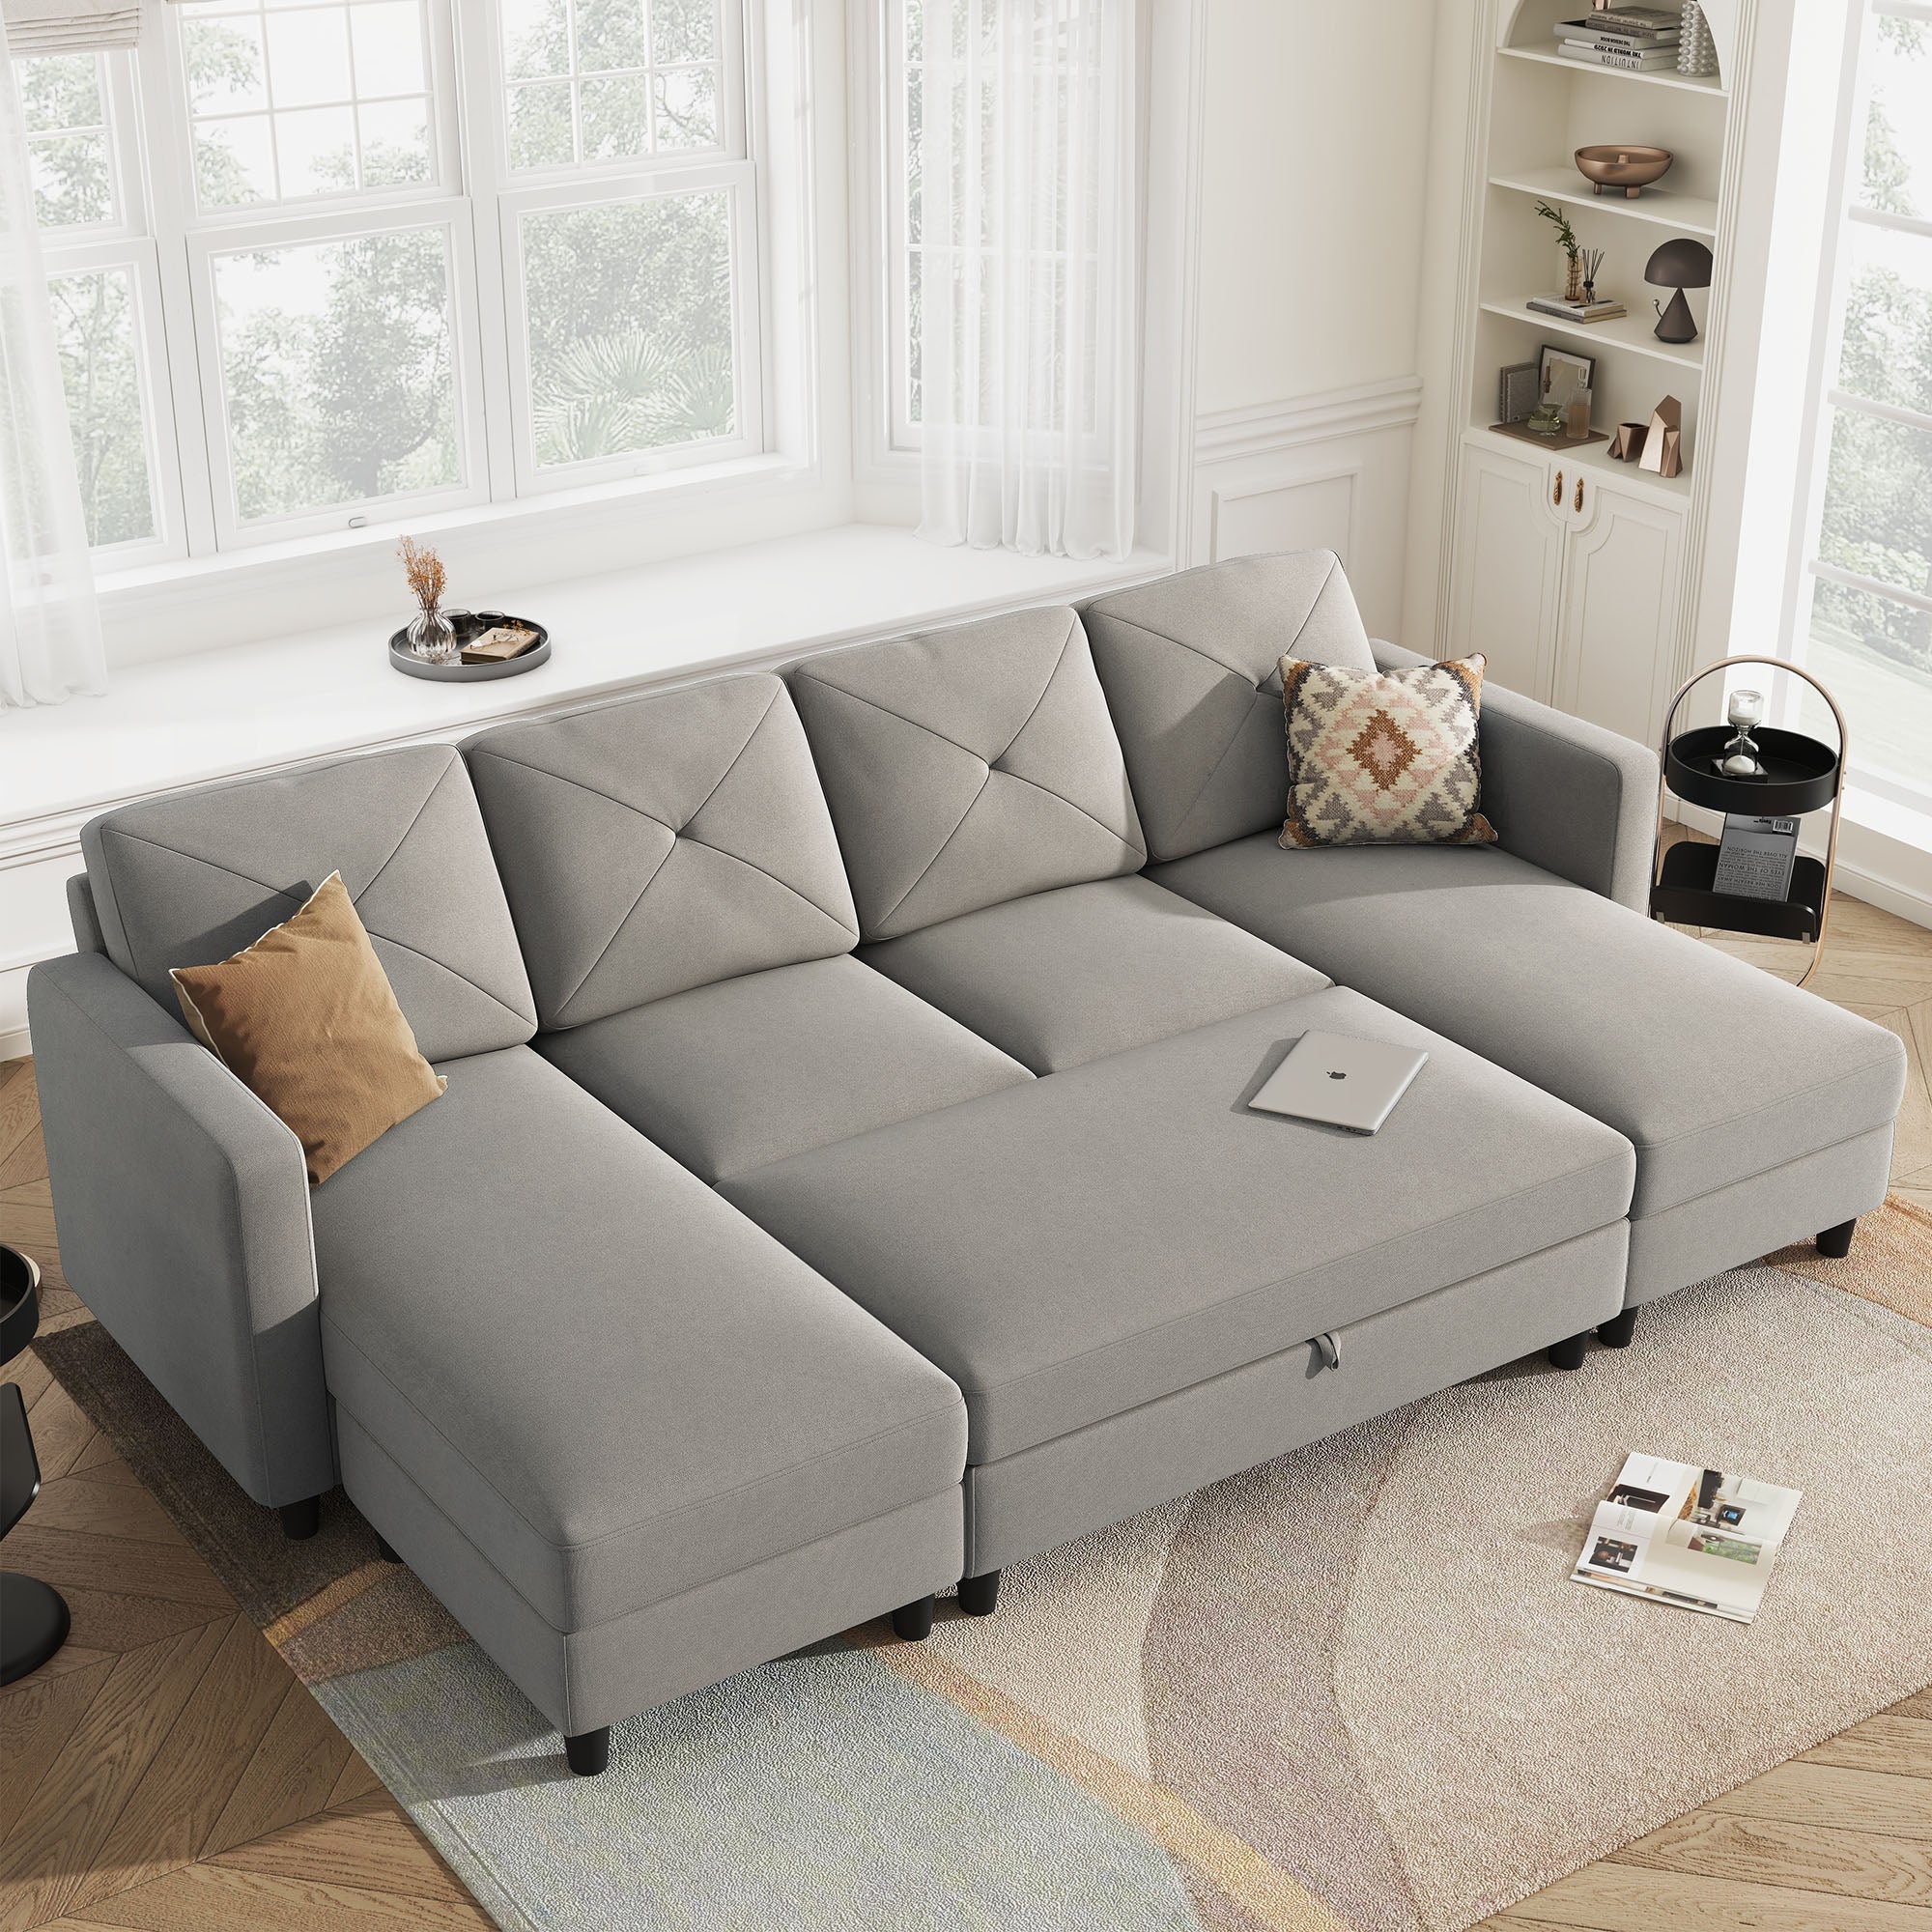 HONBAY Sleeper Sectional Sofa with Chaises U Shaped Couch with Storage Ottoman Sofa Bed for Living Room